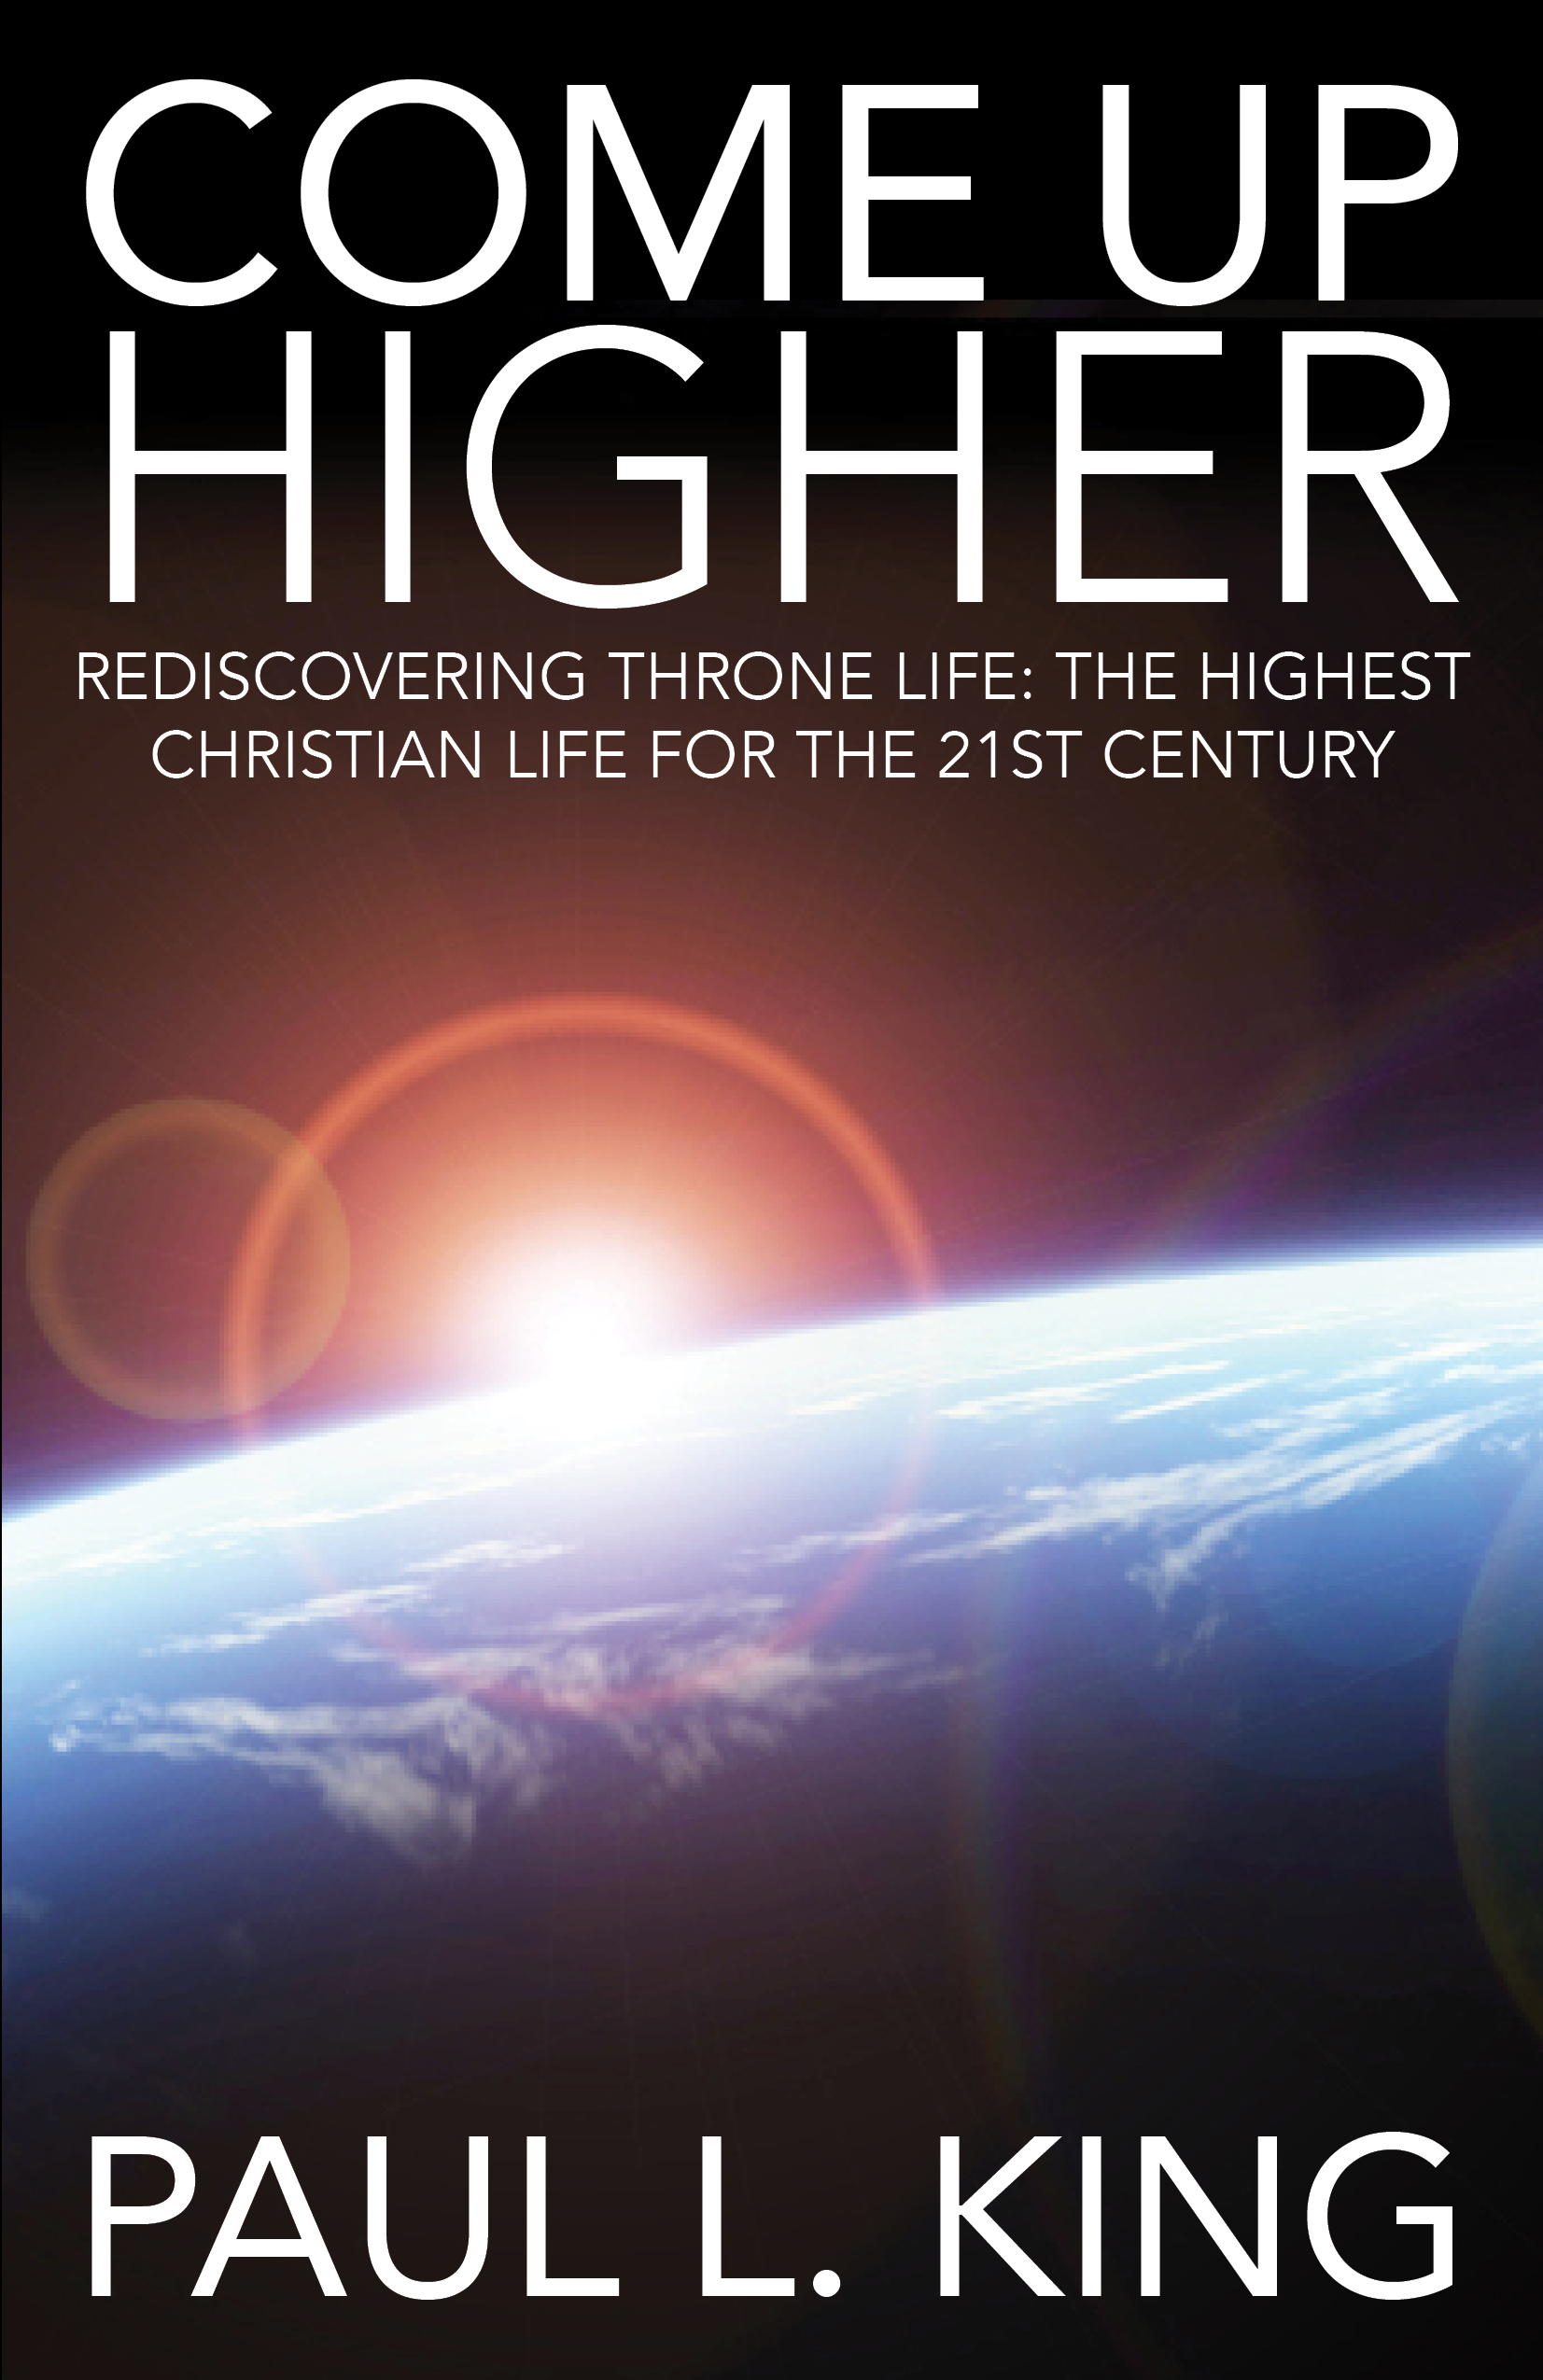 Come Up Higher - Rediscovering Throne Life: The Highest Christian Life